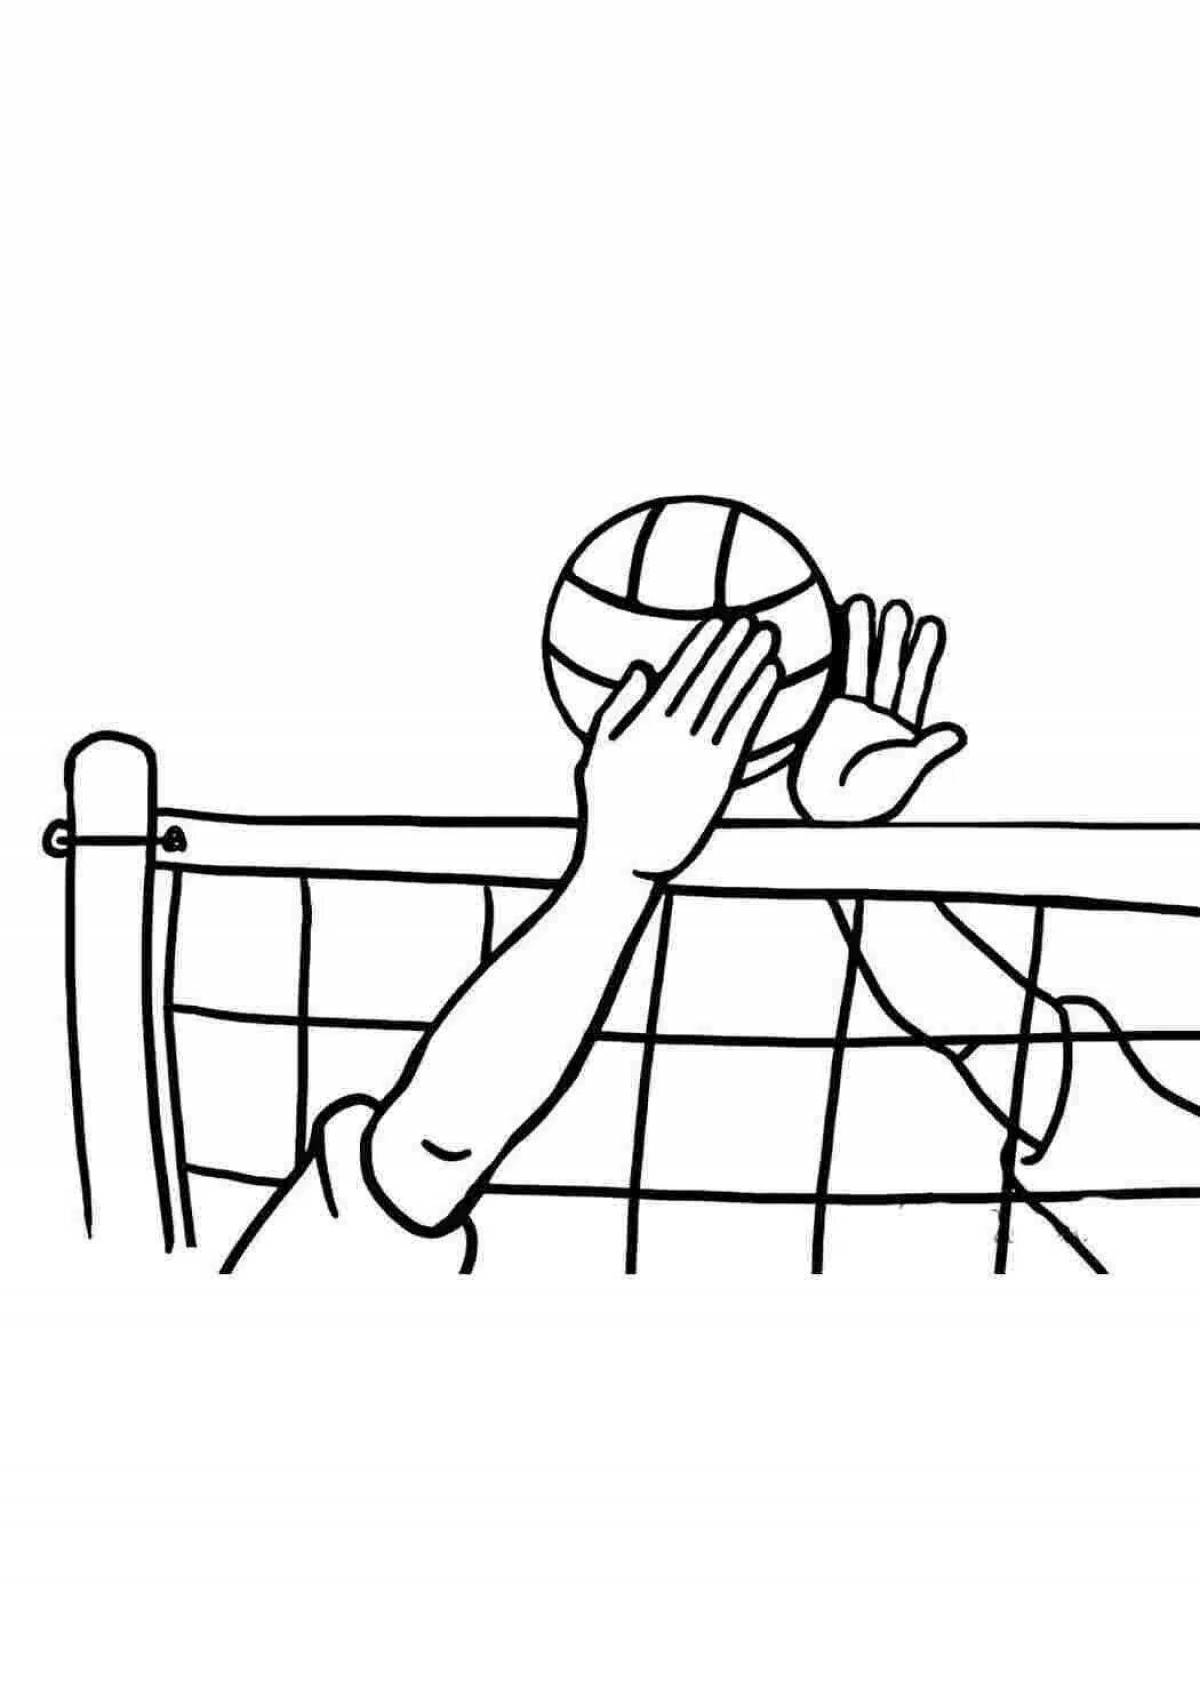 Colorful volleyball coloring book for preschoolers